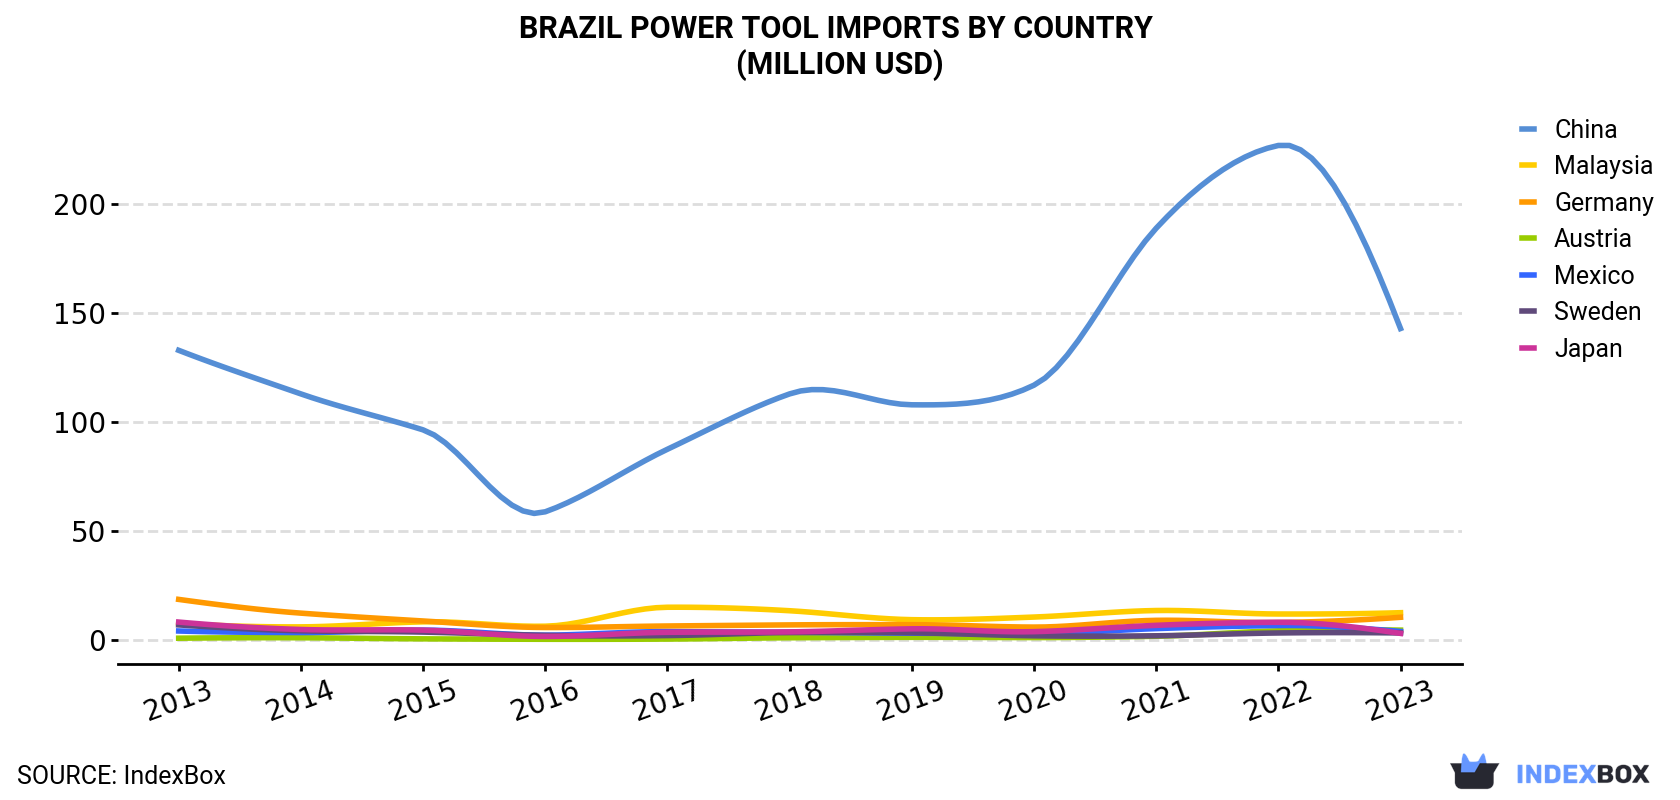 Brazil Power Tool Imports By Country (Million USD)